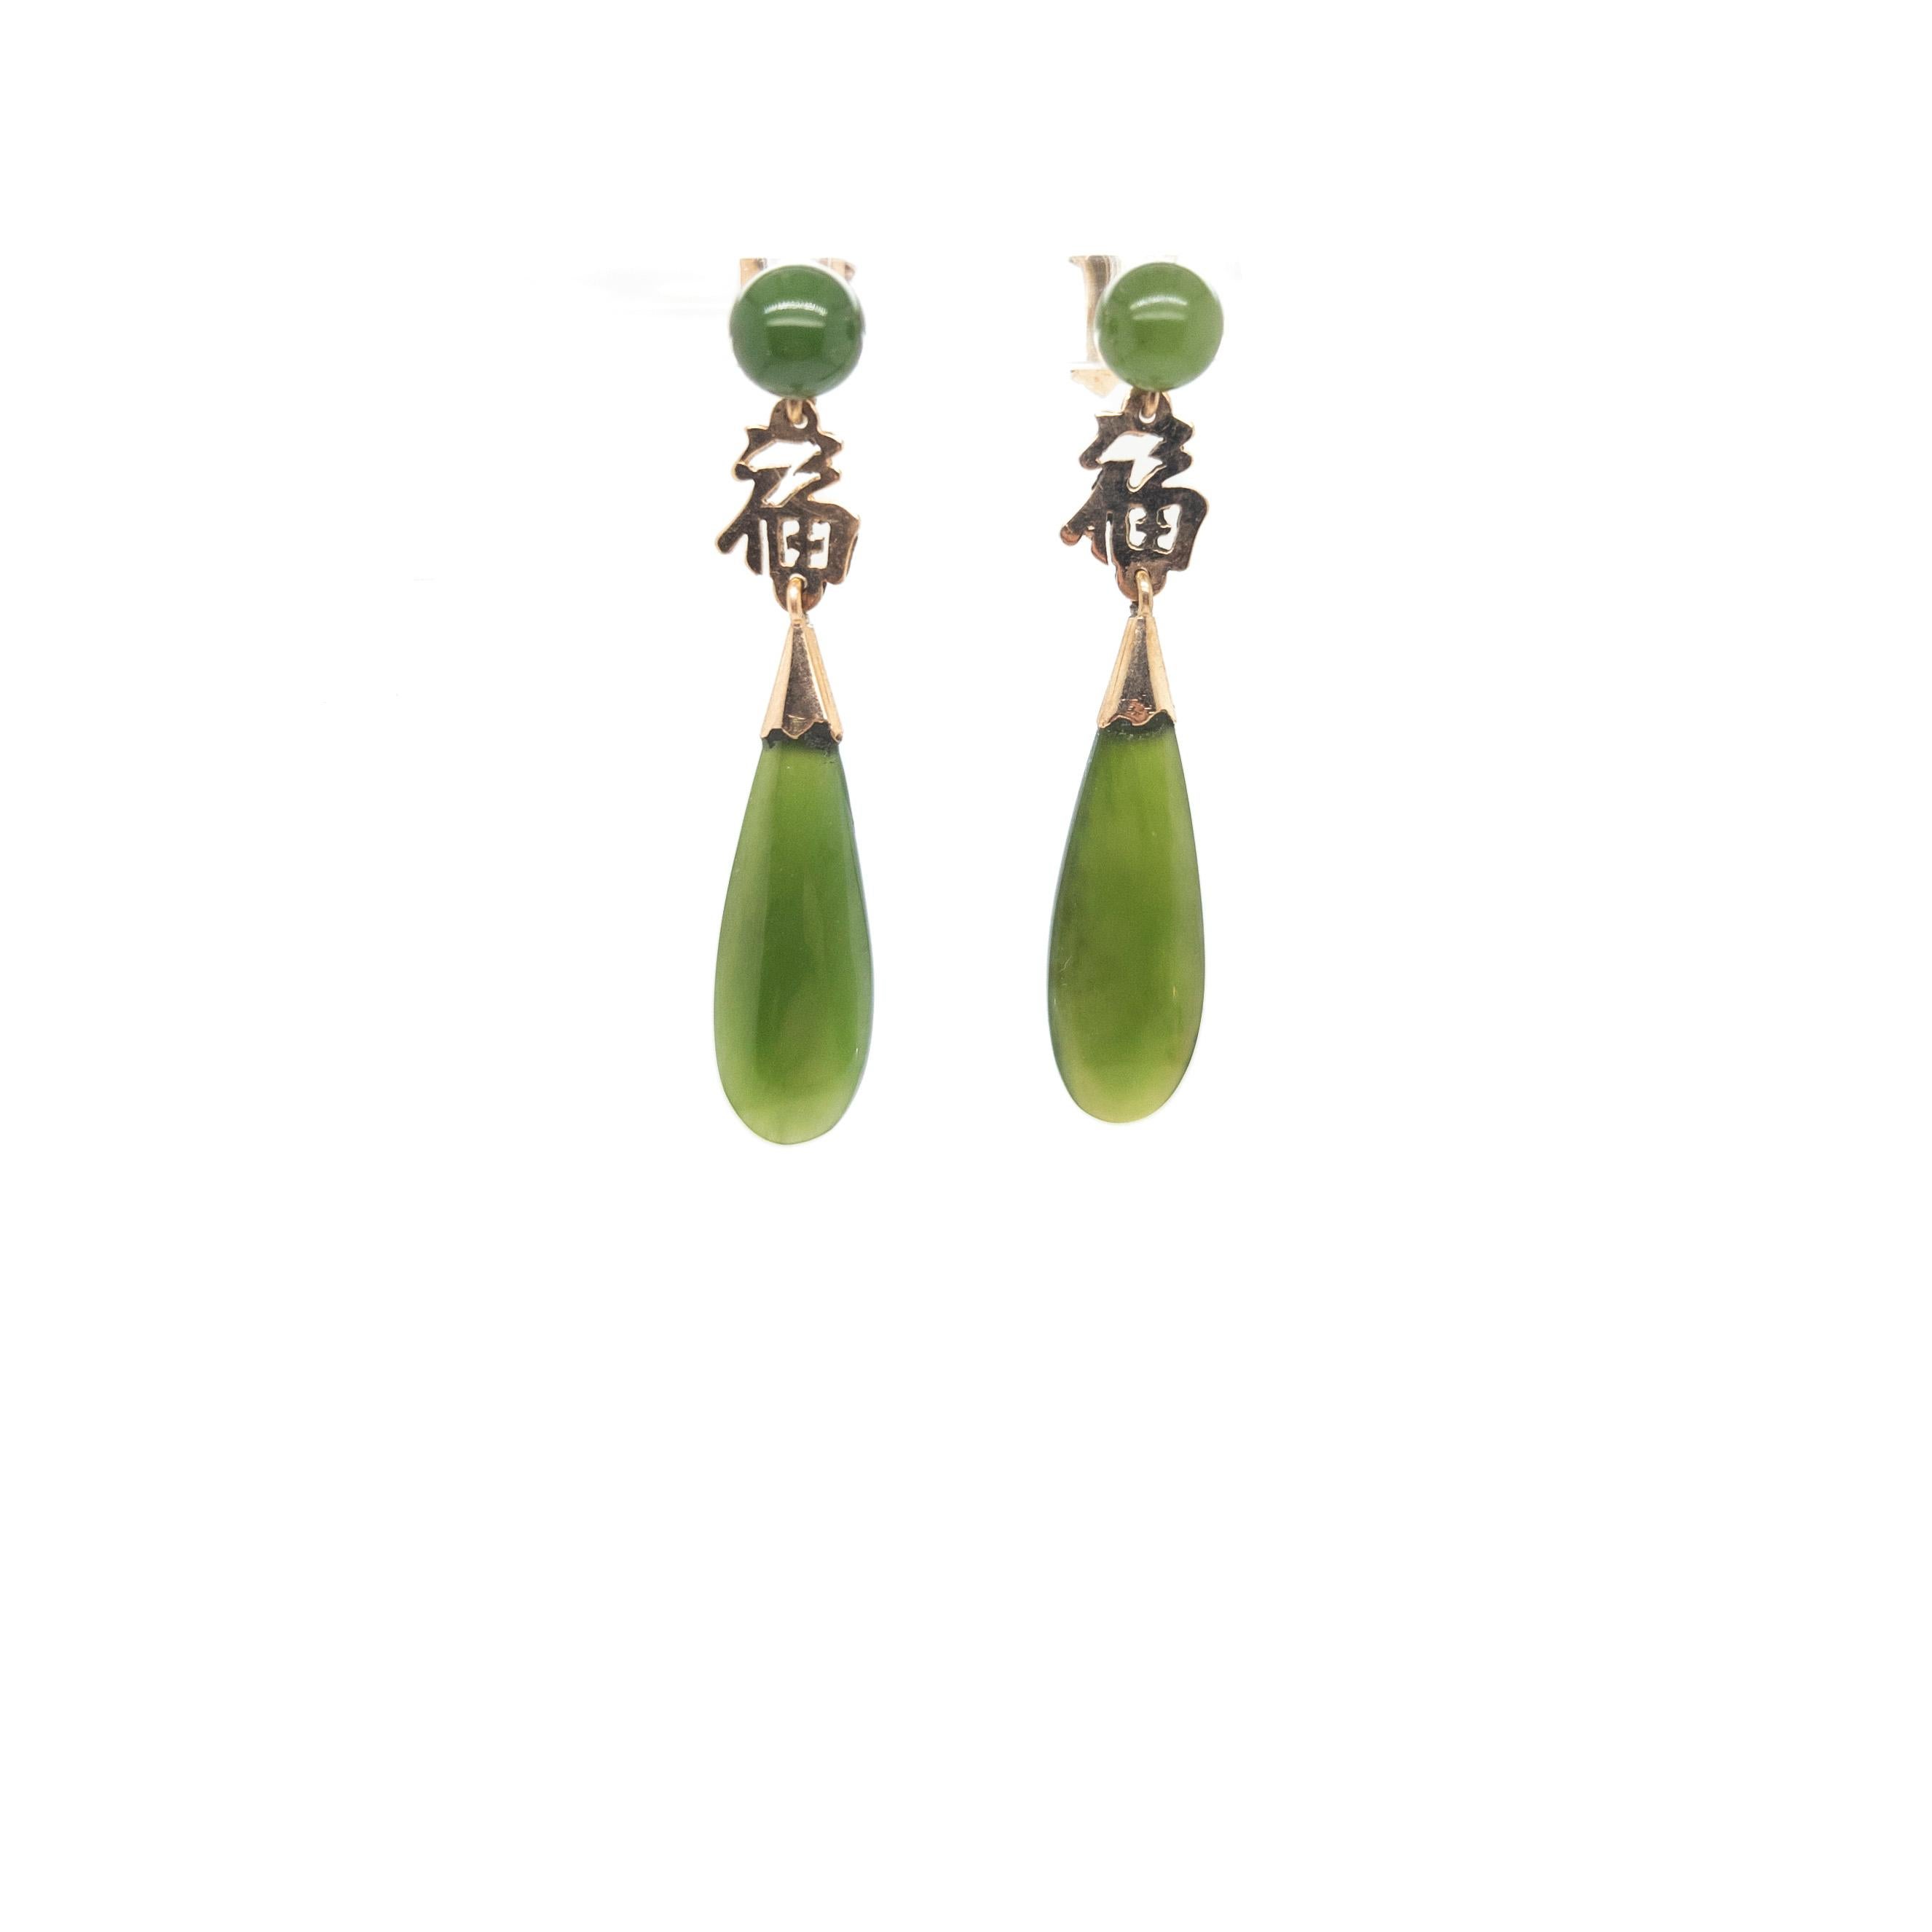 A fine pair of Chinese gold & jade earrings.

In 14k yellow gold and green jade (nephrite).

From 